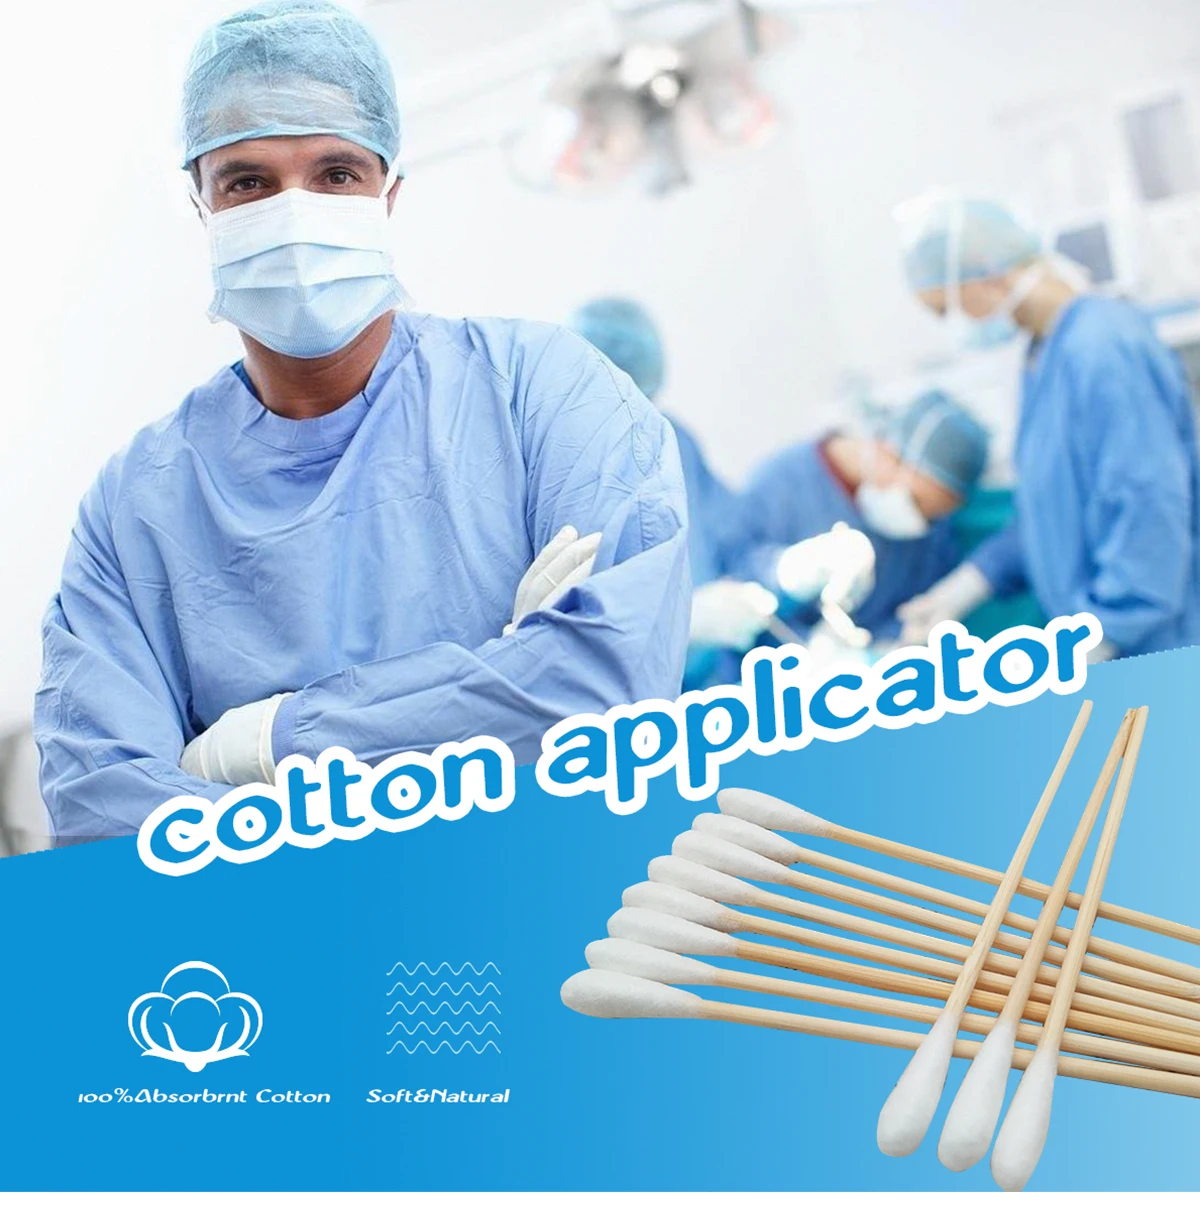 Medical Disposable Products Wool Applicator Medical Materials & Accessories High Absorbent Cotton 2 Years 100% Wool CE White EO